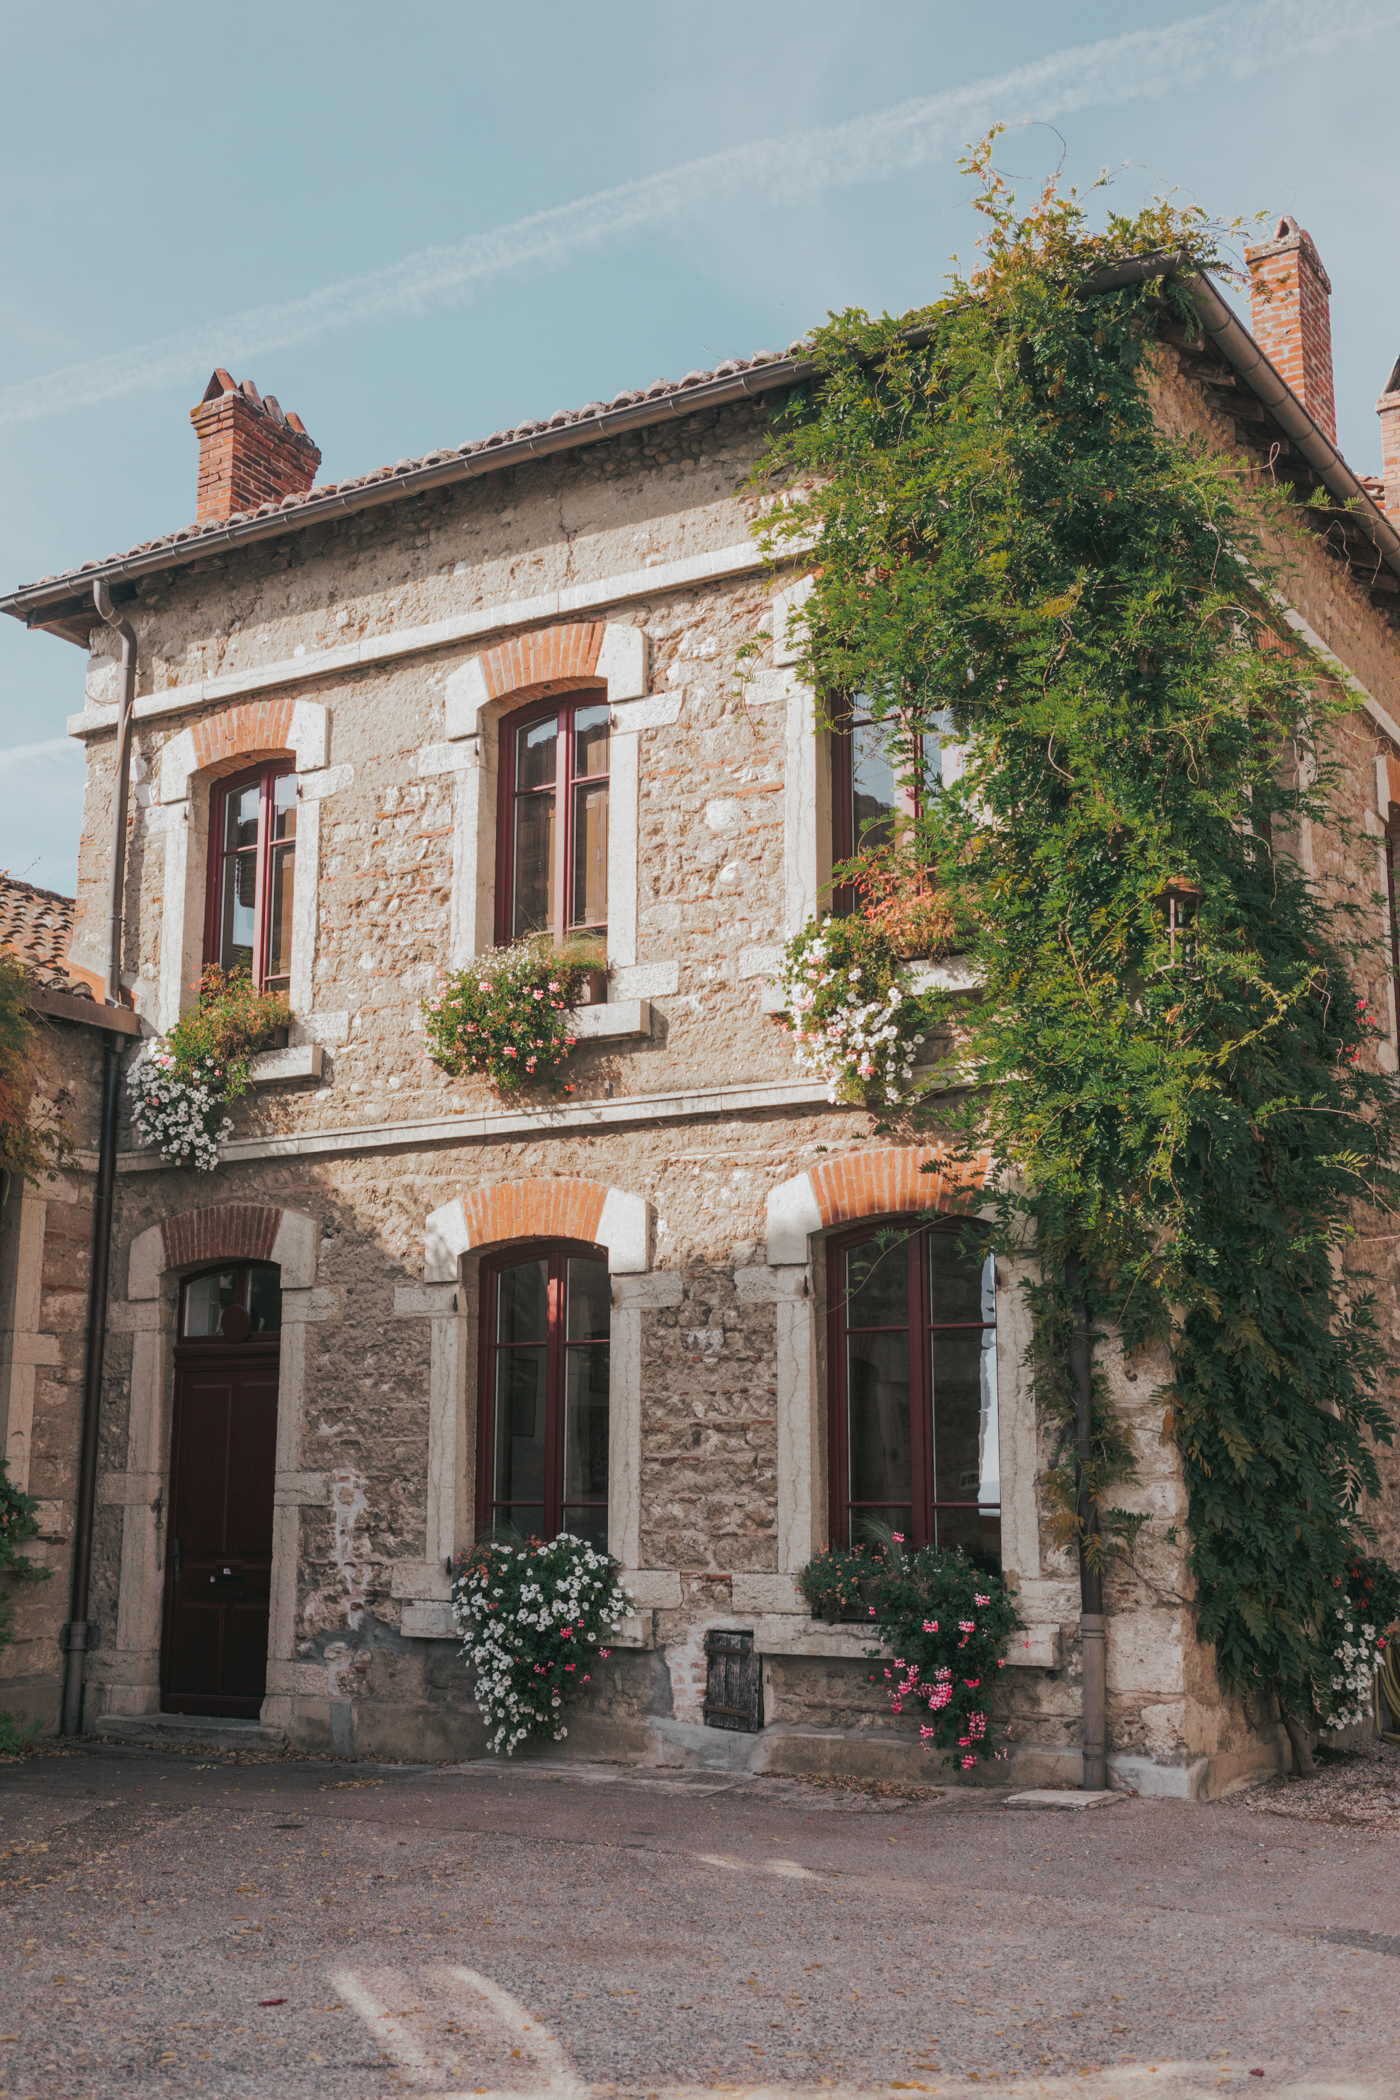 Perouges France Medieval Town - Everything you need to know before visiting this #SmallFrenchVillage on a day trip from Lyon